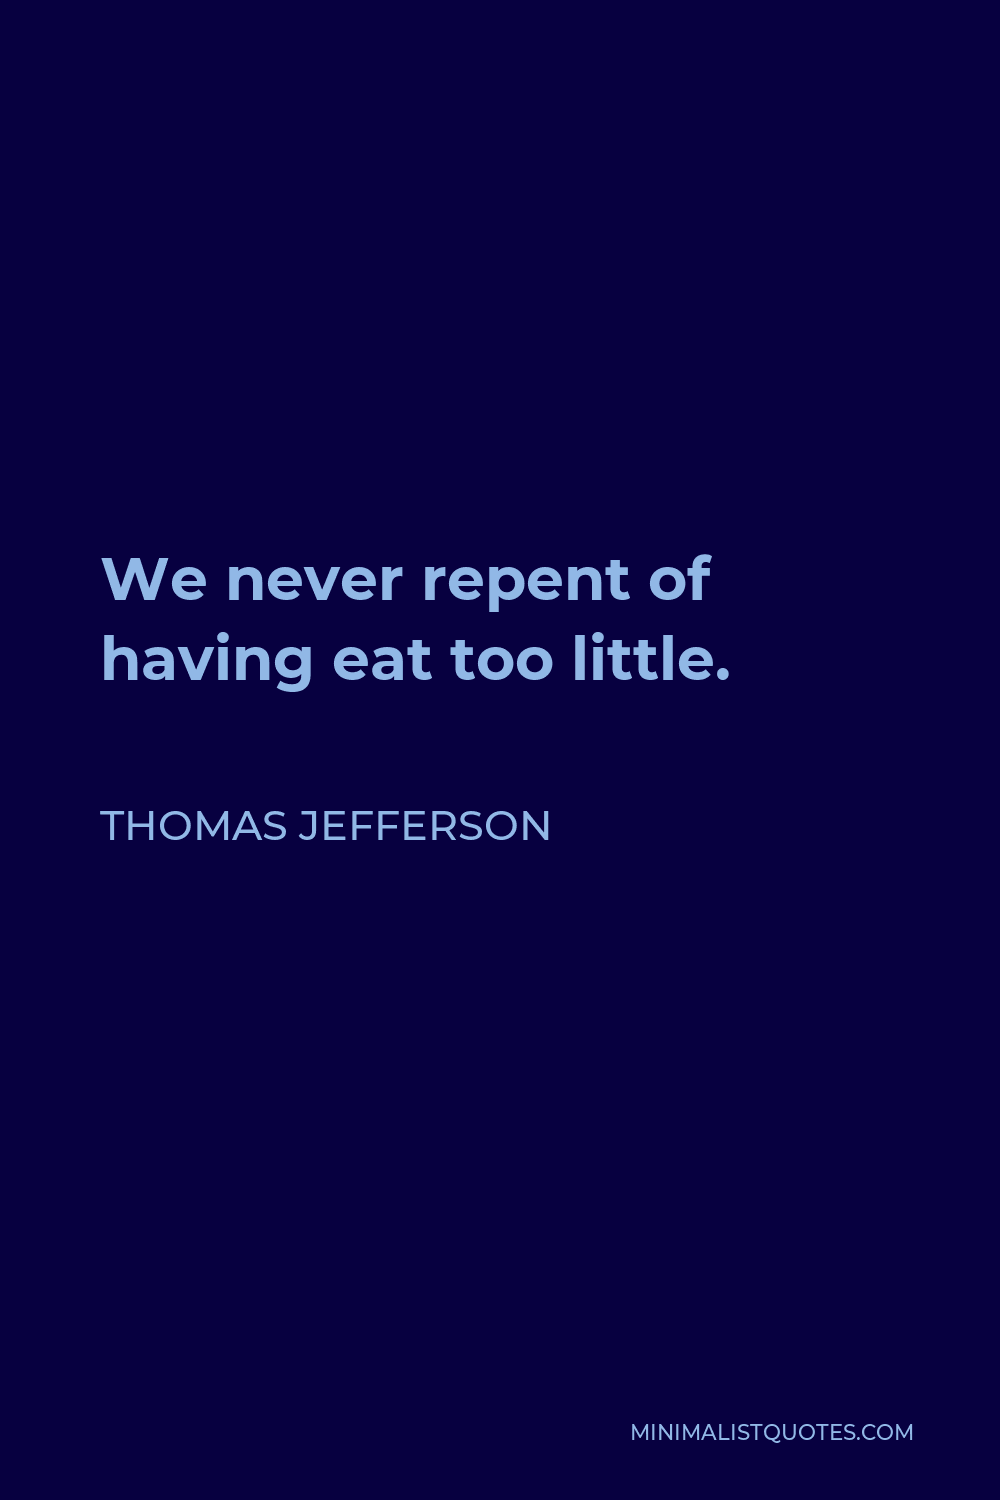 Thomas Jefferson Quote - We never repent of having eat too little.